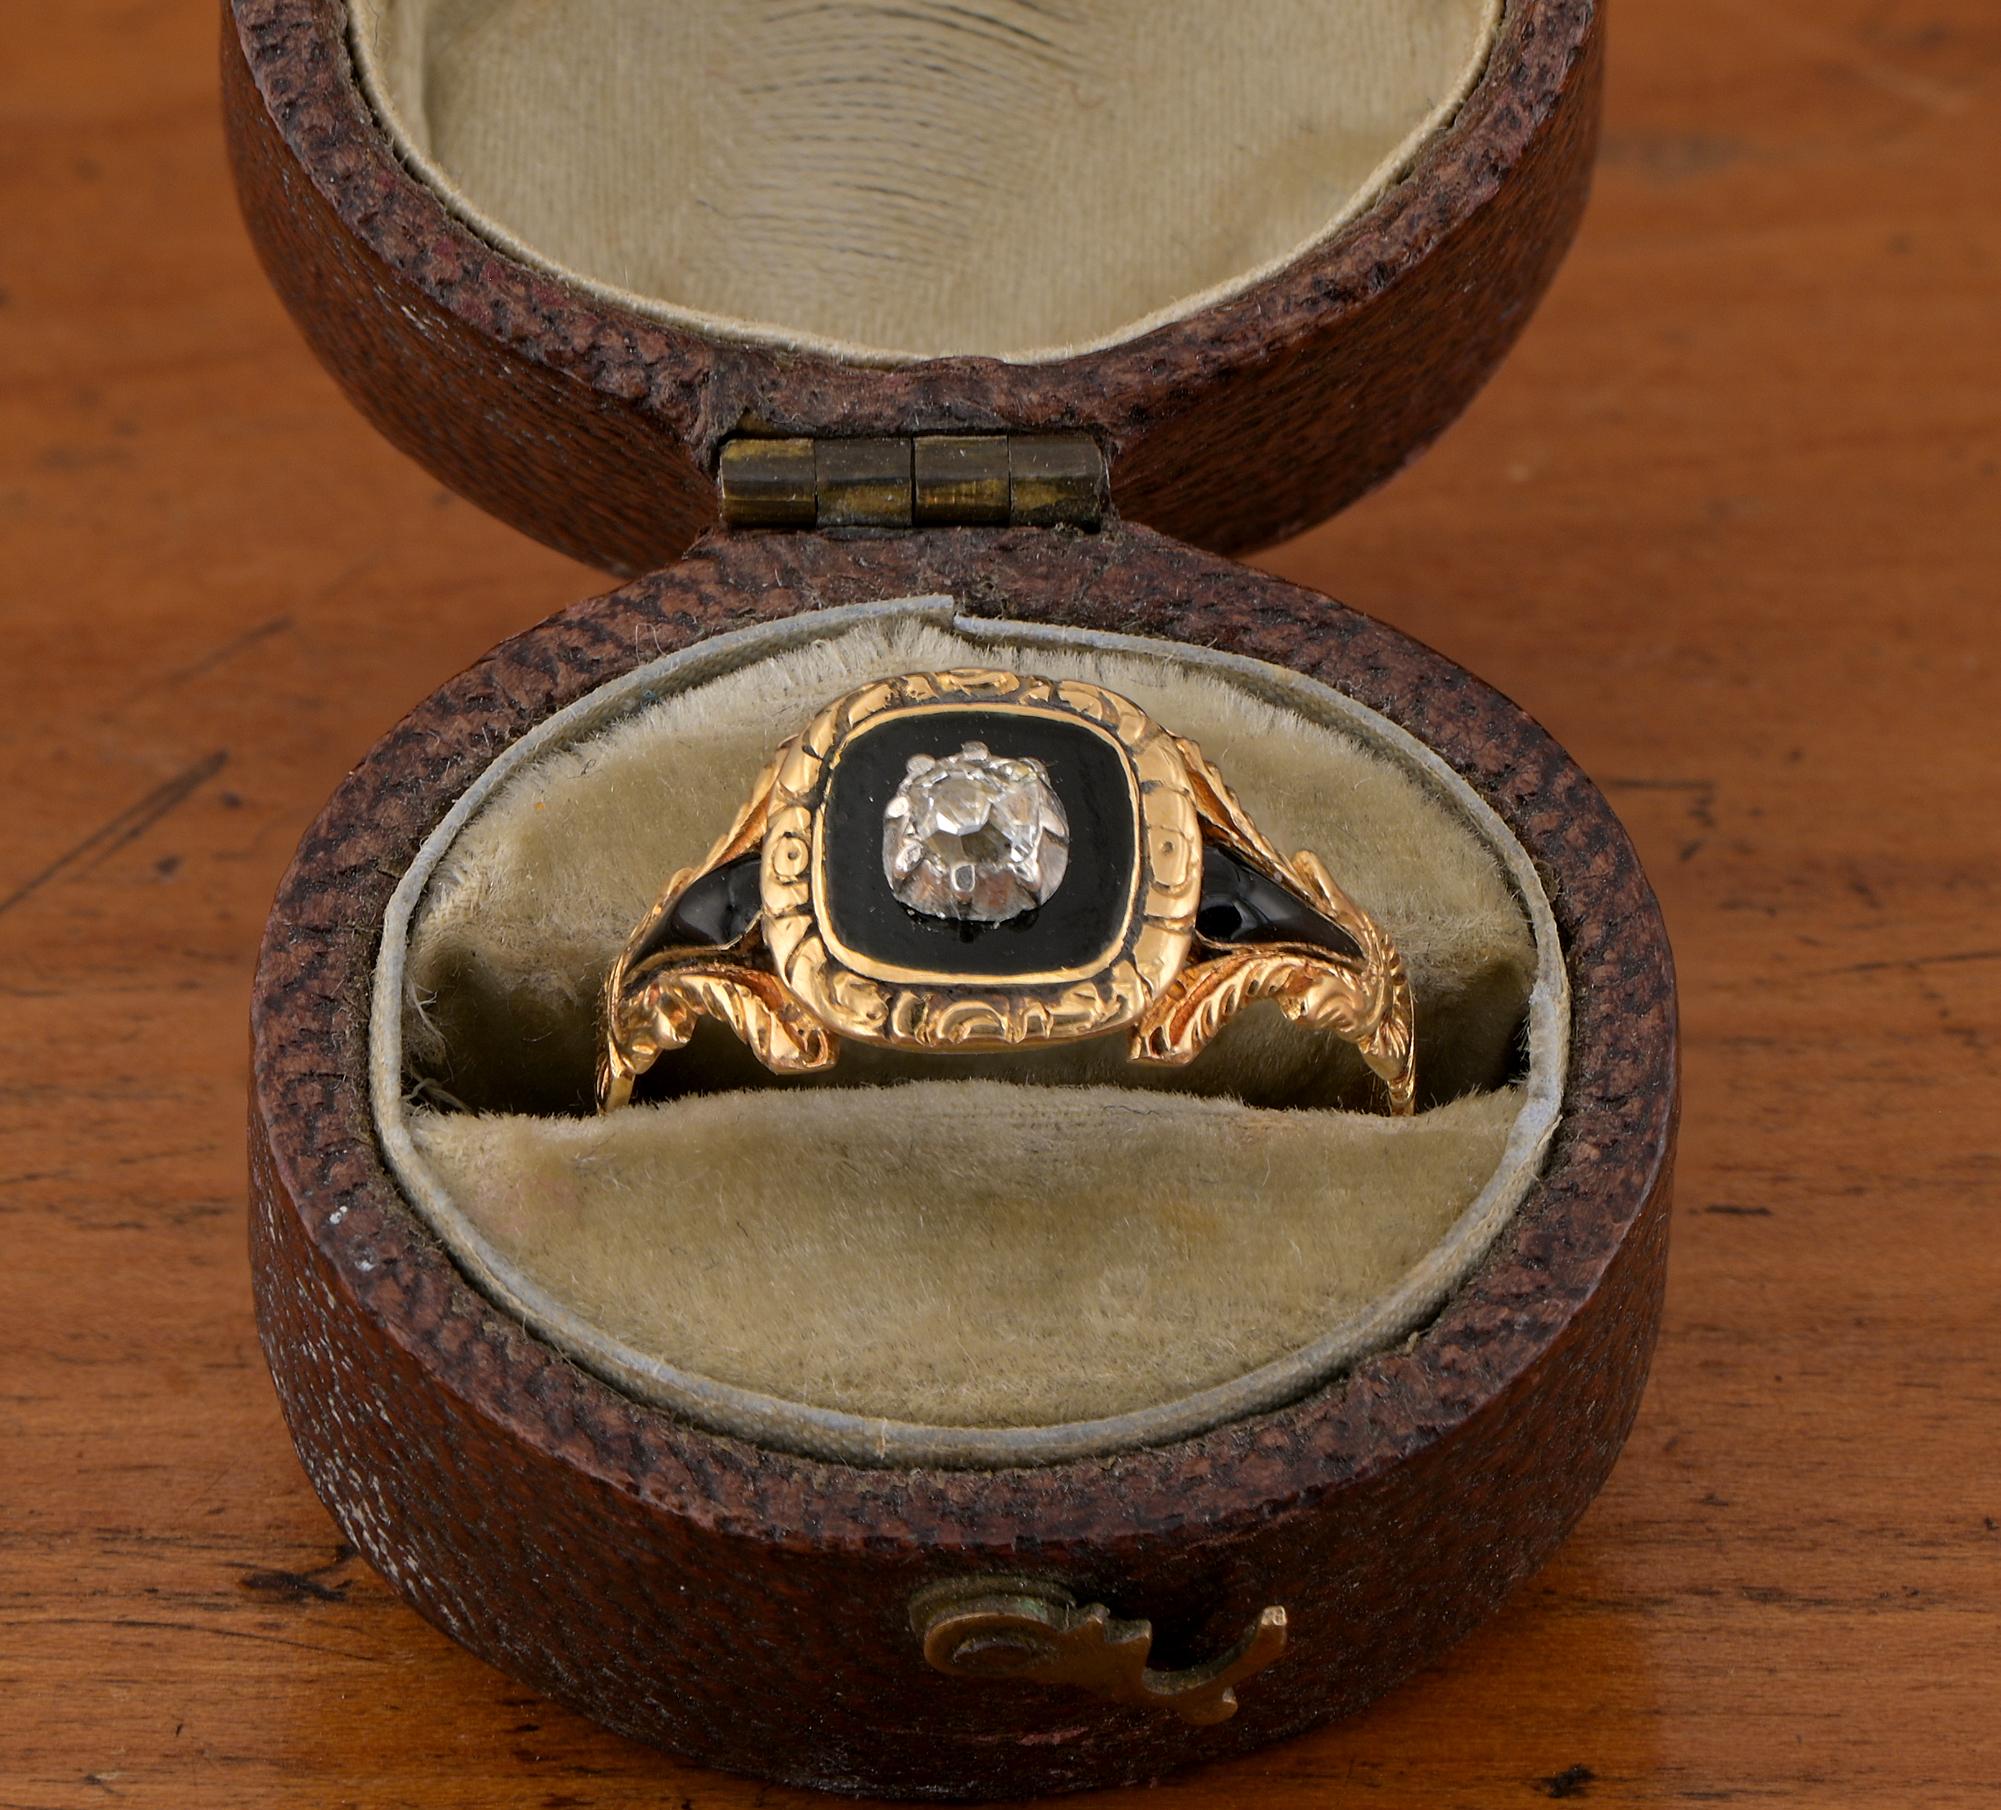 An antique Georgian period Diamond and Black enamel mourning ring in 18 Kt yellow gold, set with an old cut Diamond in a border of black enamel, the engraved shoulders decorated with further enamels
With a glass covered locket compartment on the